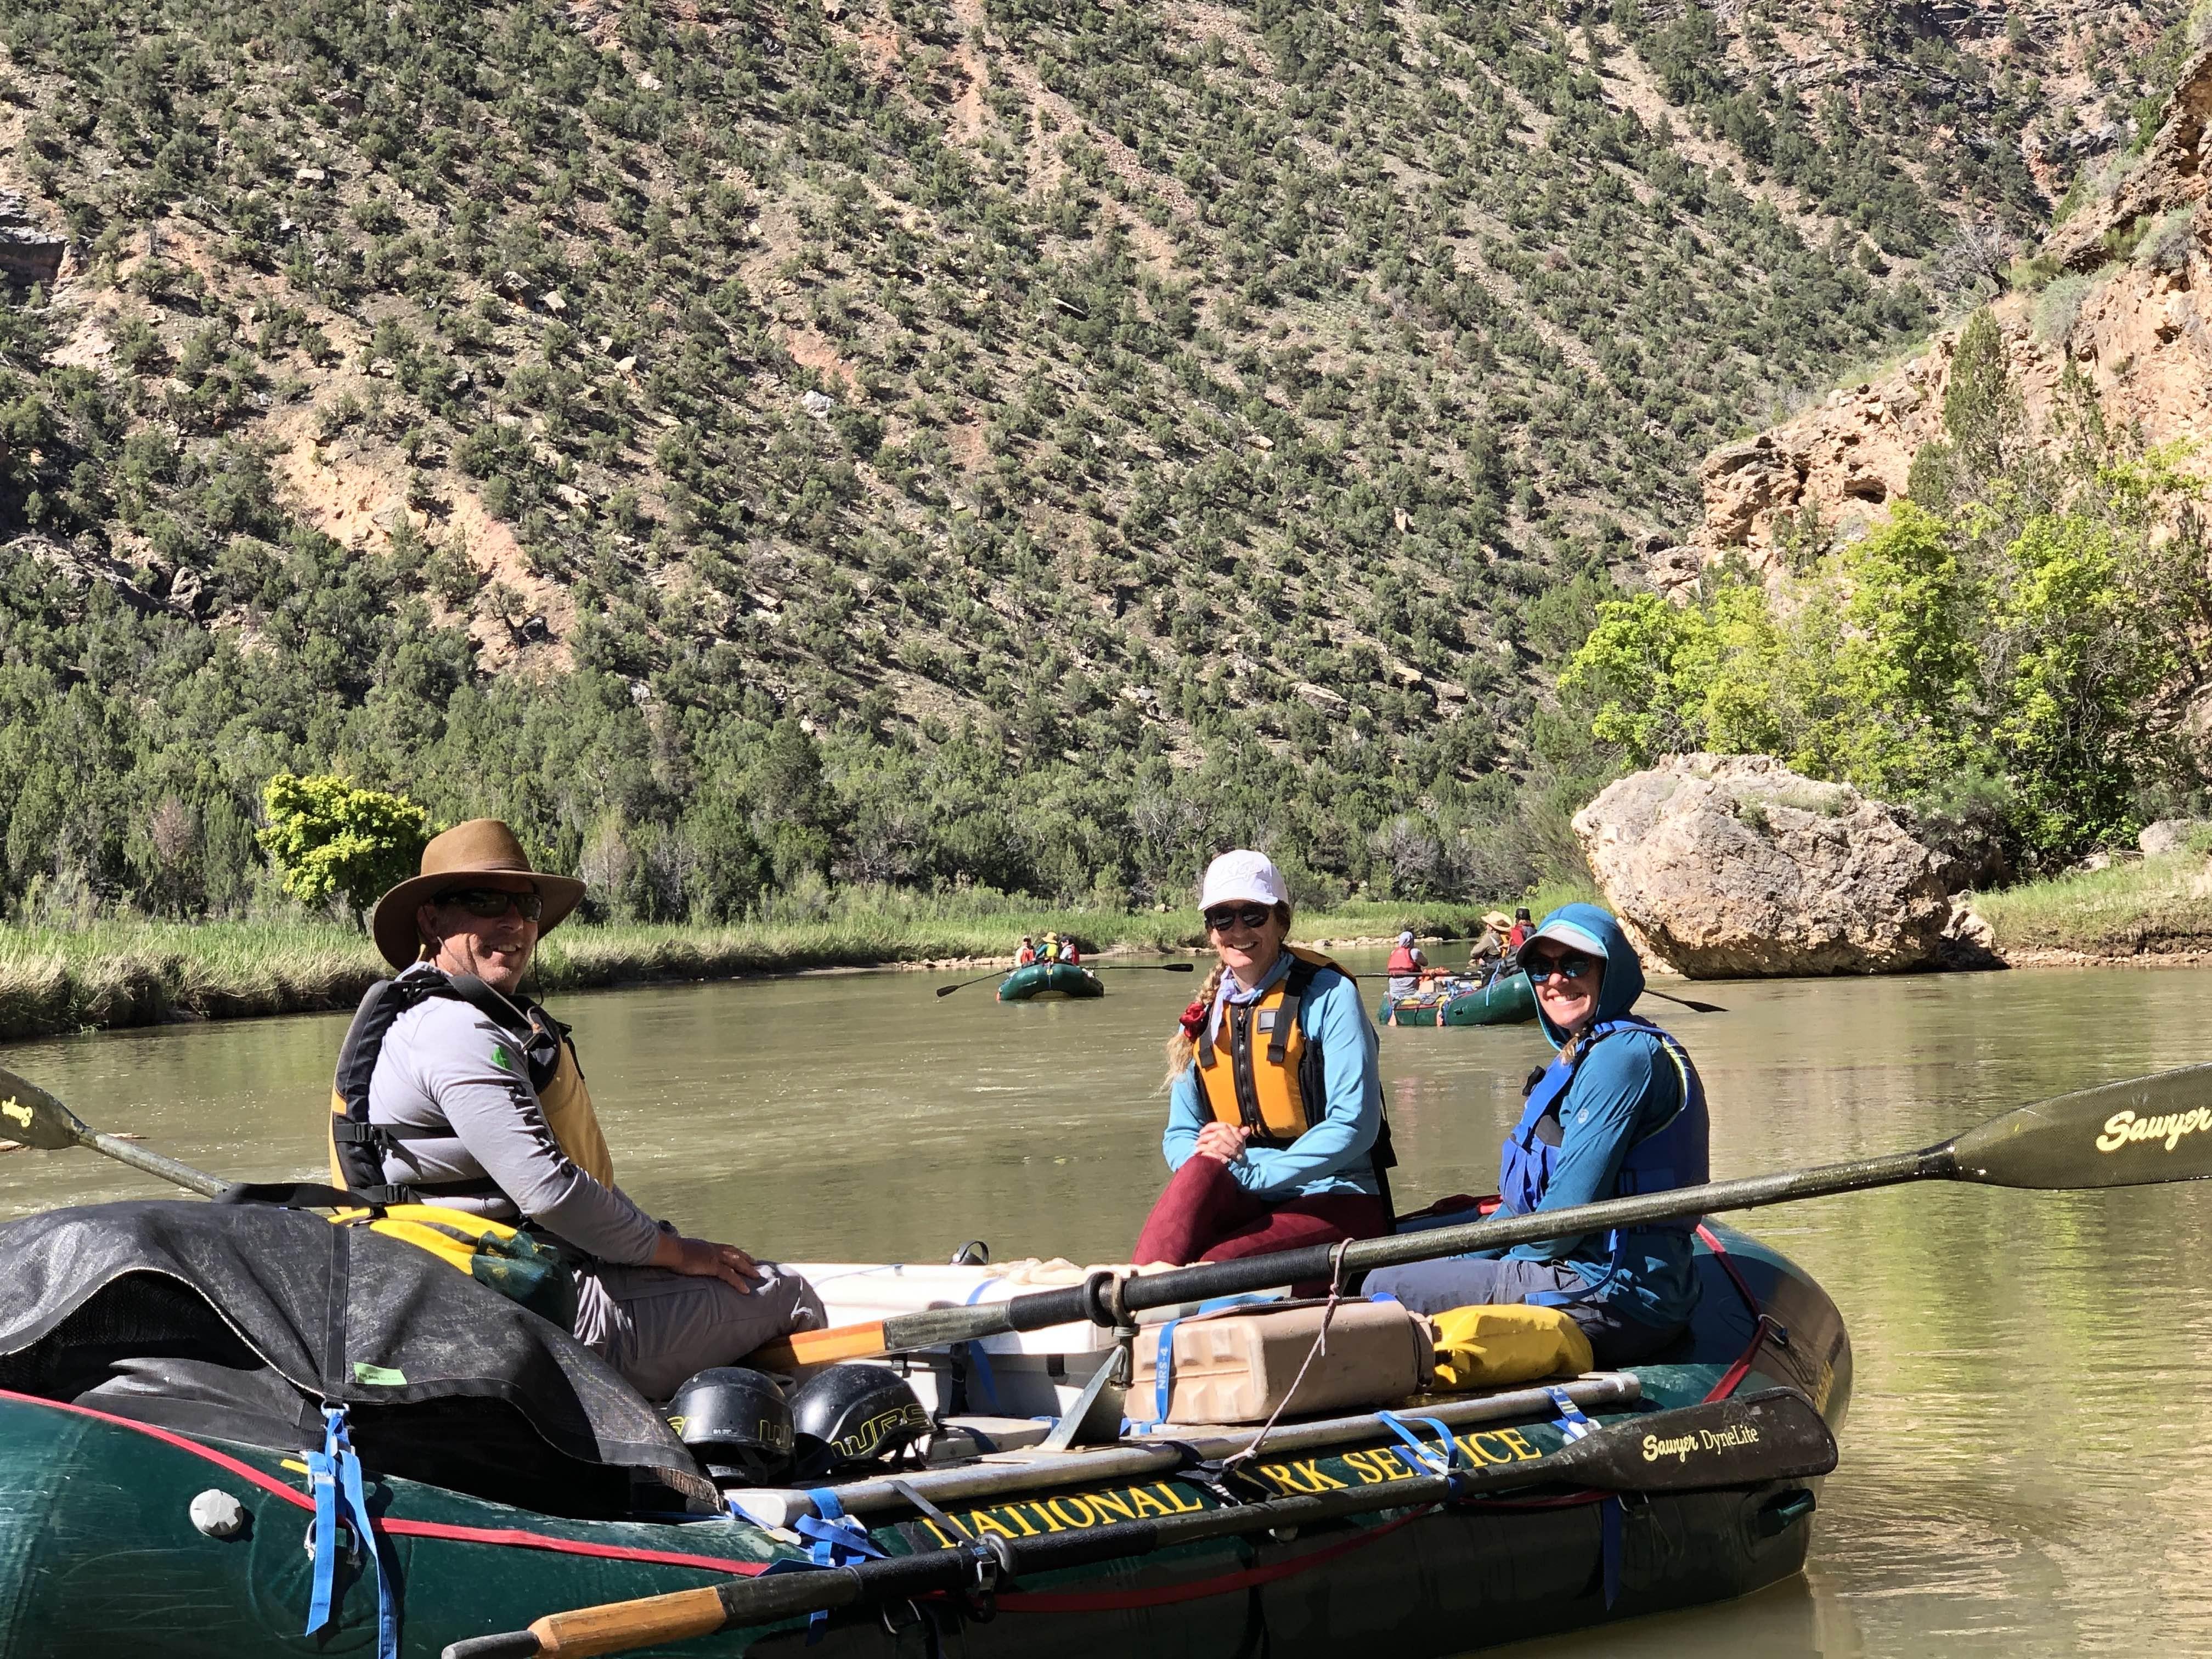 Two women and one man sit in a raft posing for a picture on the Green River, with other rafts on the river in the background. 